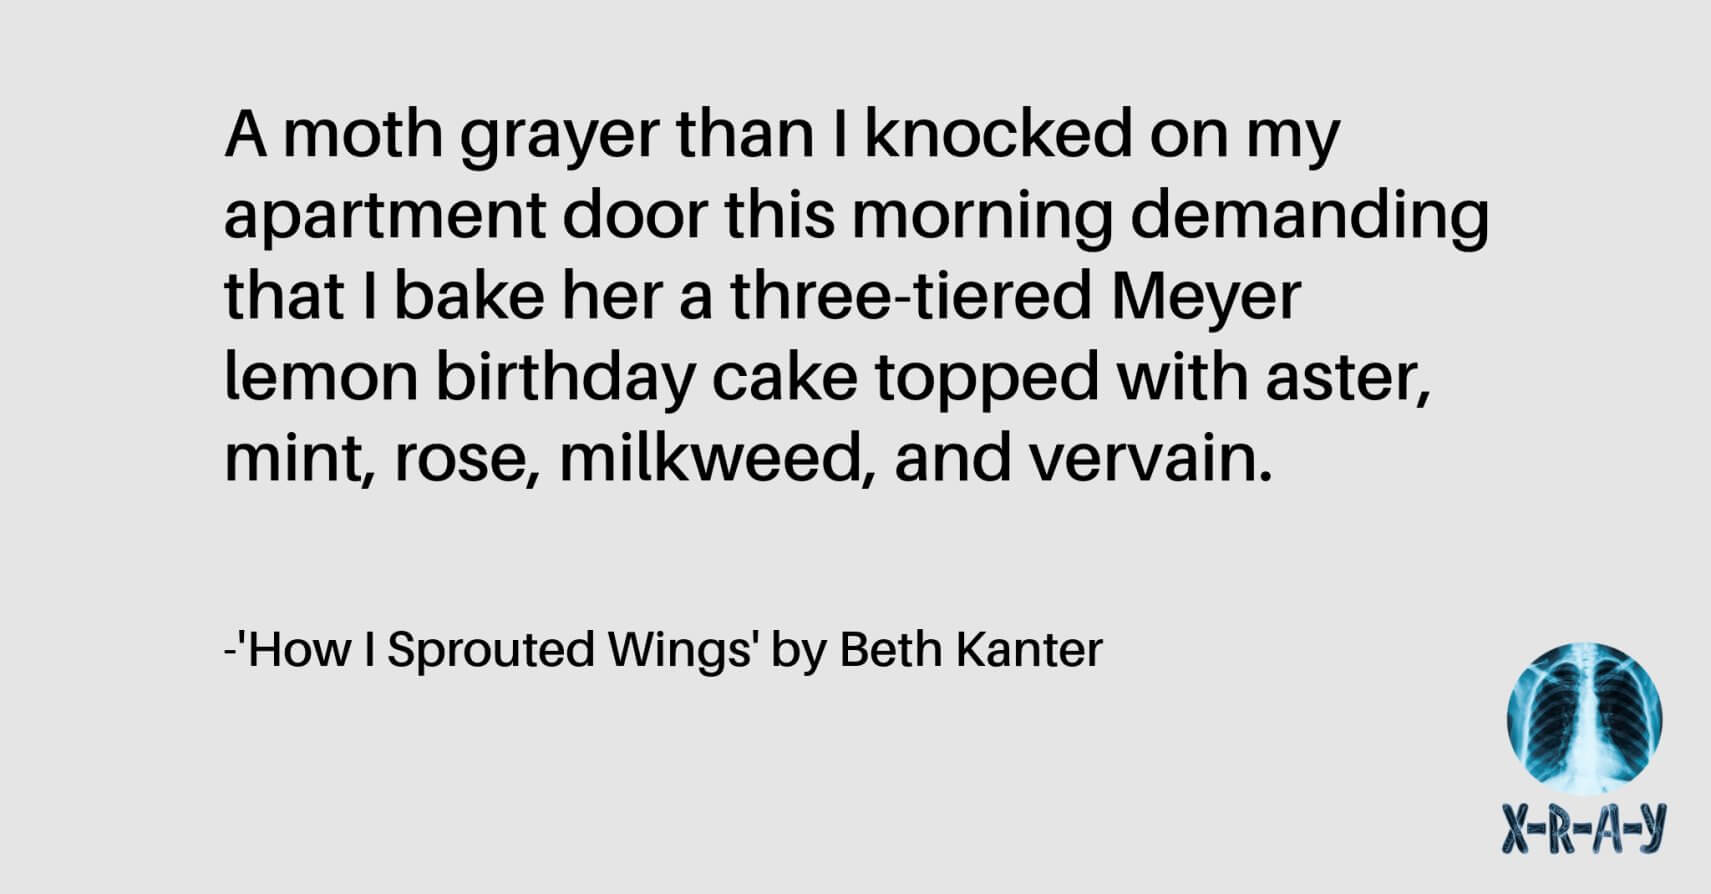 HOW I SPROUTED WINGS by Beth Kanter